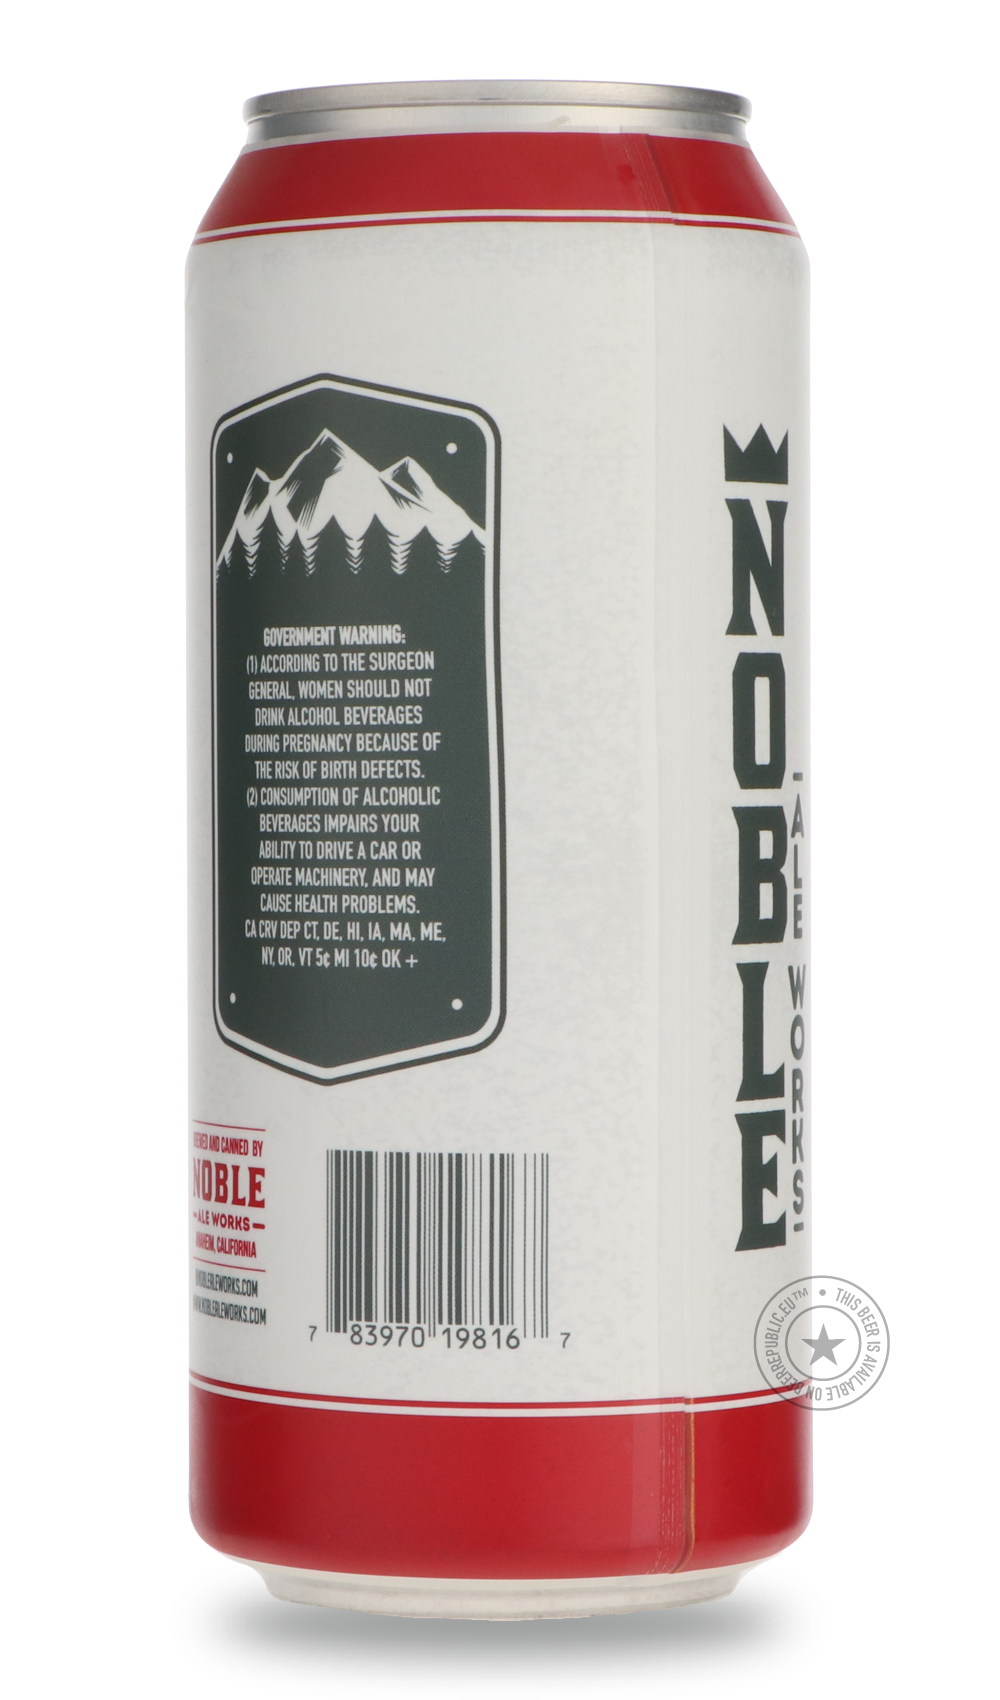 -Noble- I Love It!-IPA- Only @ Beer Republic - The best online beer store for American & Canadian craft beer - Buy beer online from the USA and Canada - Bier online kopen - Amerikaans bier kopen - Craft beer store - Craft beer kopen - Amerikanisch bier kaufen - Bier online kaufen - Acheter biere online - IPA - Stout - Porter - New England IPA - Hazy IPA - Imperial Stout - Barrel Aged - Barrel Aged Imperial Stout - Brown - Dark beer - Blond - Blonde - Pilsner - Lager - Wheat - Weizen - Amber - Barley Wine - 